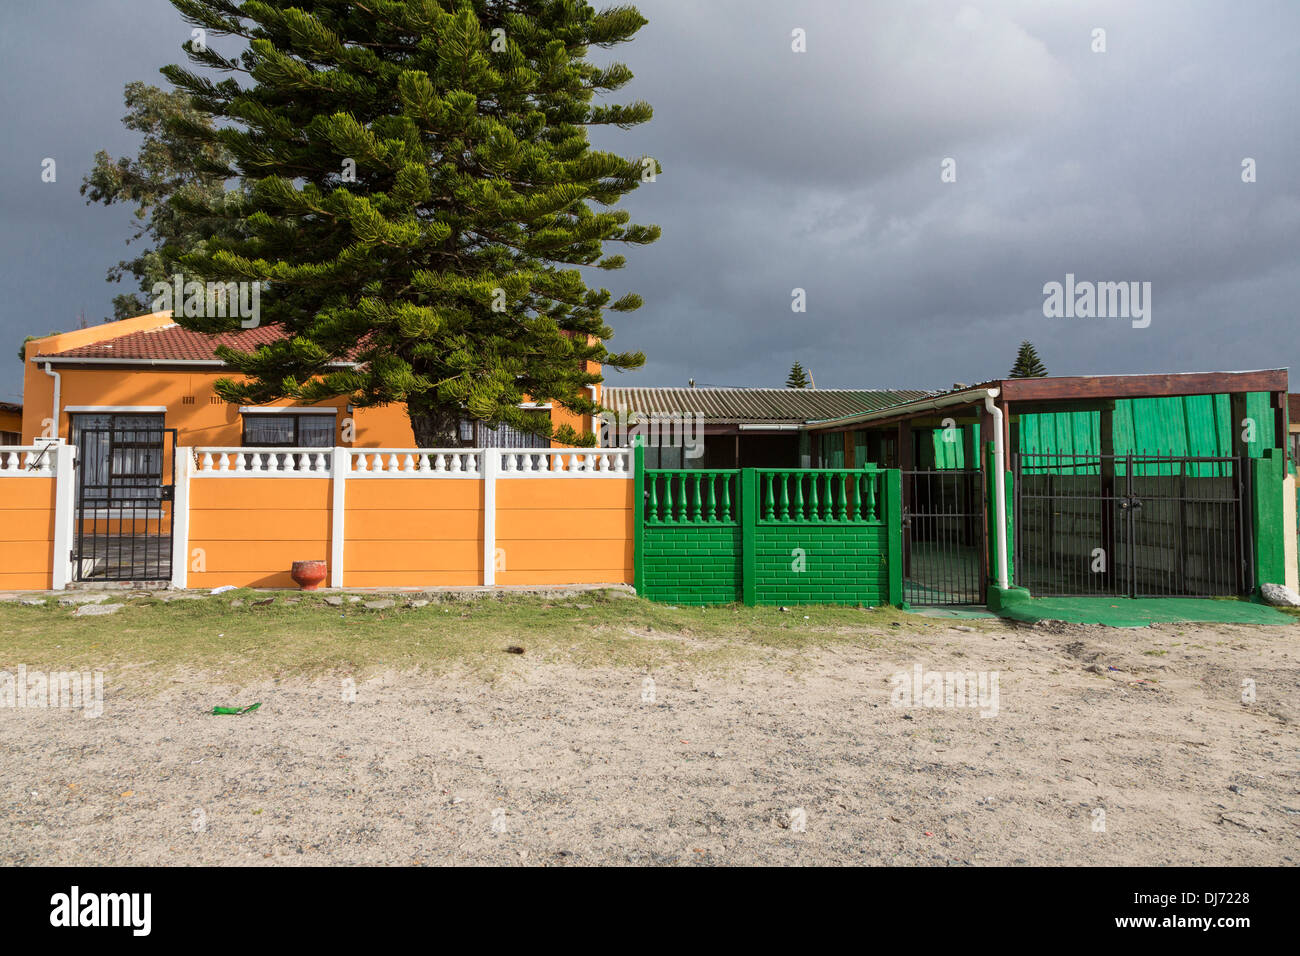 South Africa, Cape Town. Middle-class Houses in Guguletu Township. Stock Photo